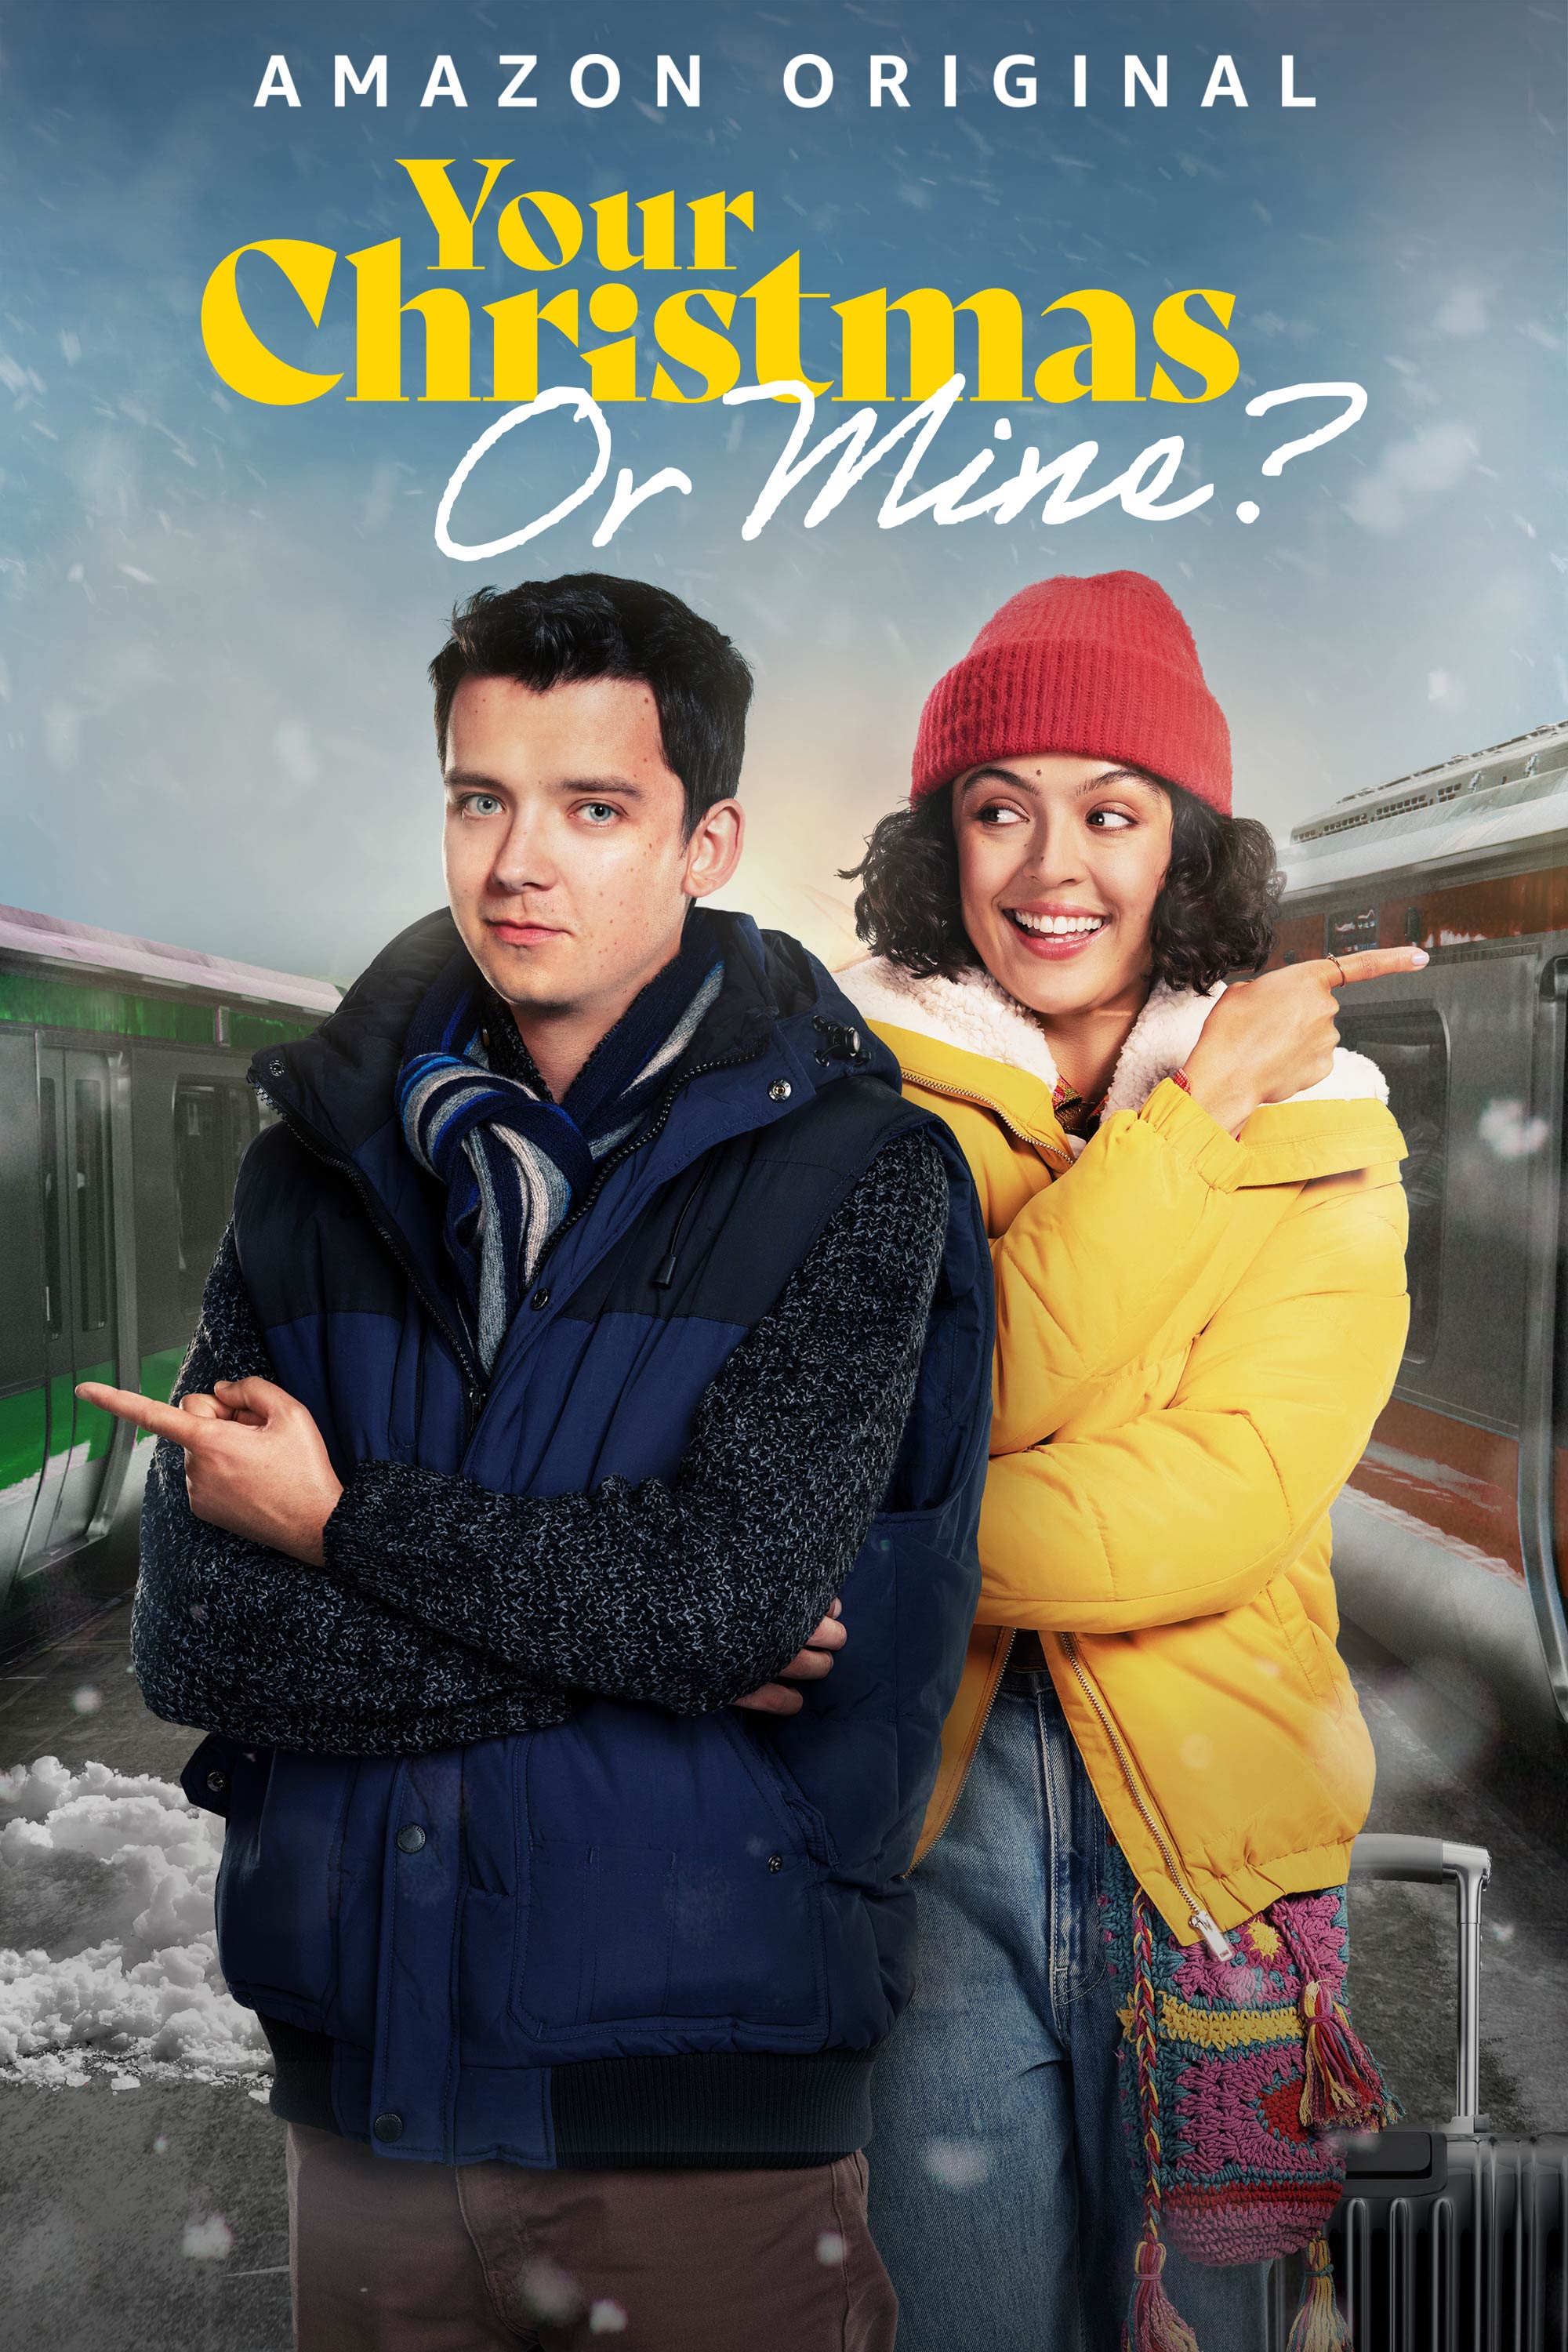 Your Christmas or Mine 2 (December 8) - Streaming on Prime VideoYour Christmas or Mine 2 continues James and Hayley's festive journey with humorous misadventures and unexpected twists amidst a mix-up in travel plans at a luxurious ski resort in the Austrian Alps.